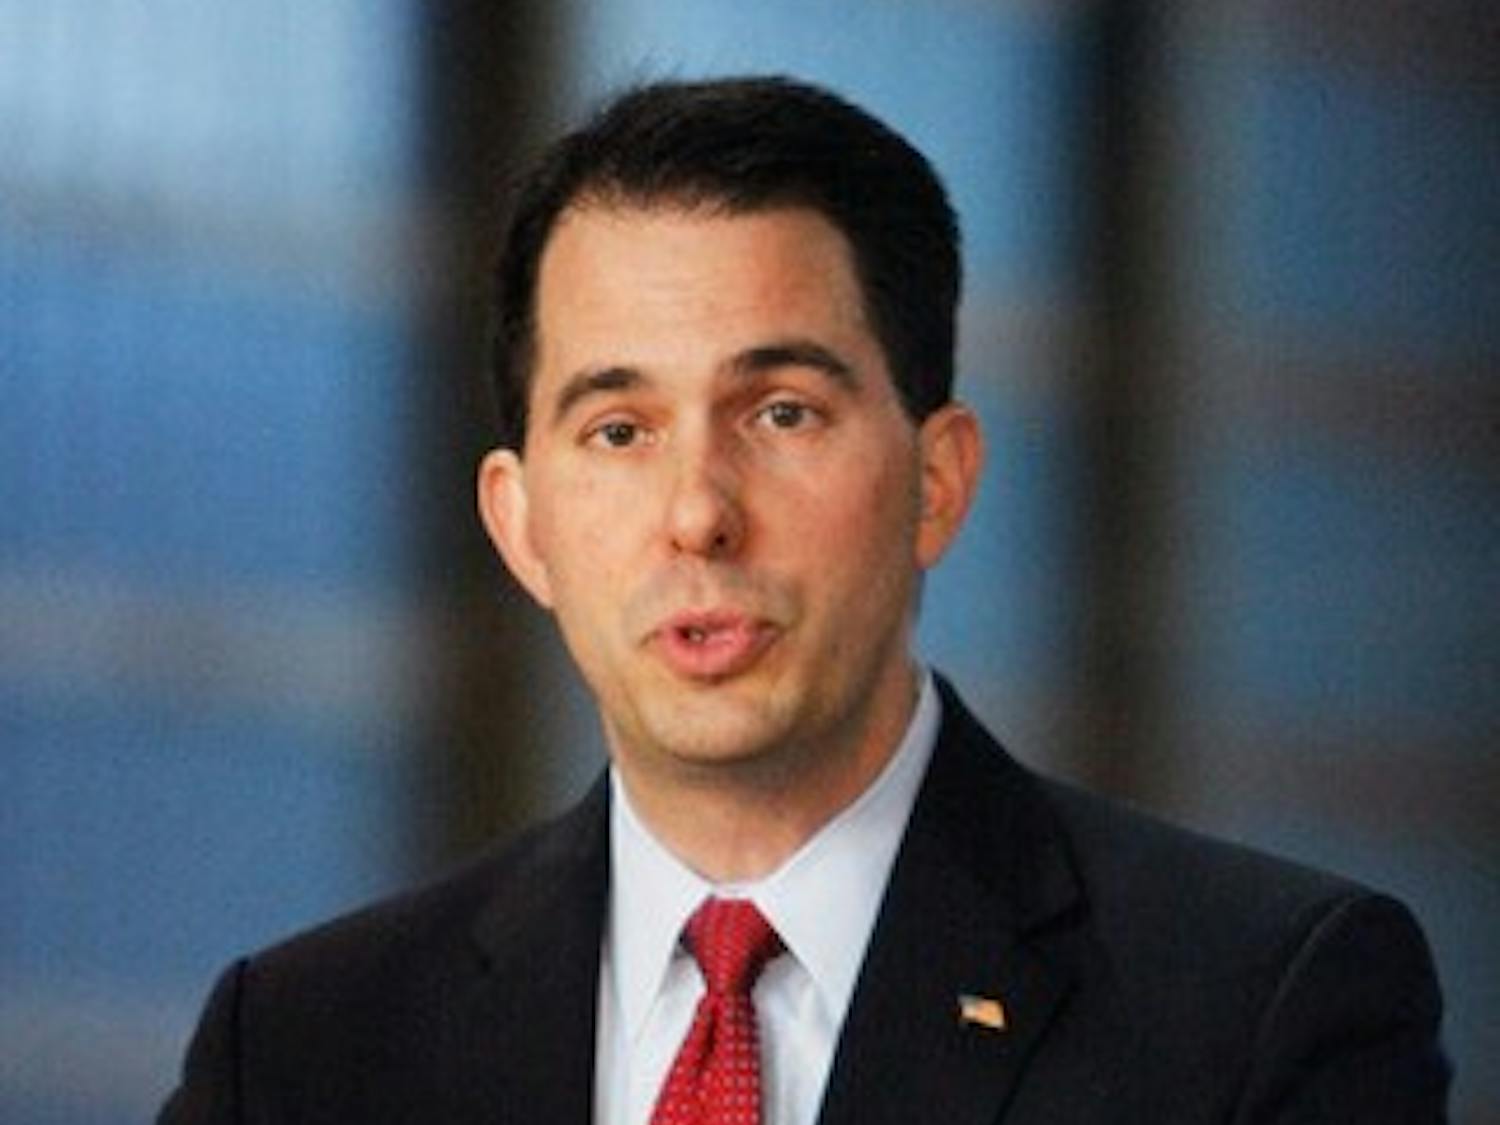 Walker declares decision to run for Wis. governor